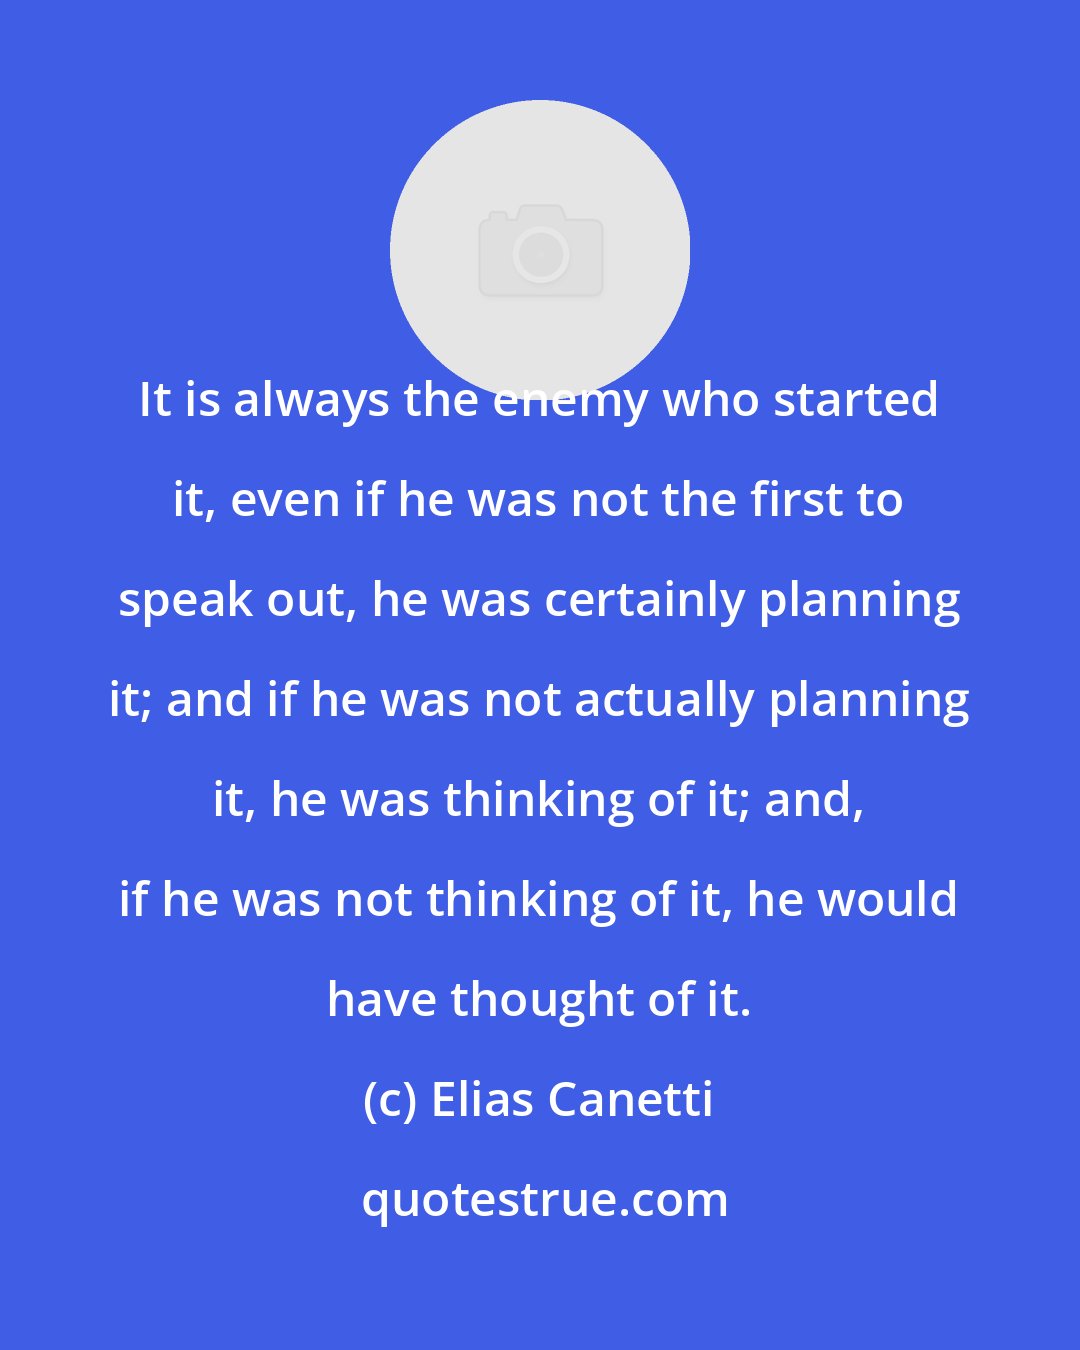 Elias Canetti: It is always the enemy who started it, even if he was not the first to speak out, he was certainly planning it; and if he was not actually planning it, he was thinking of it; and, if he was not thinking of it, he would have thought of it.